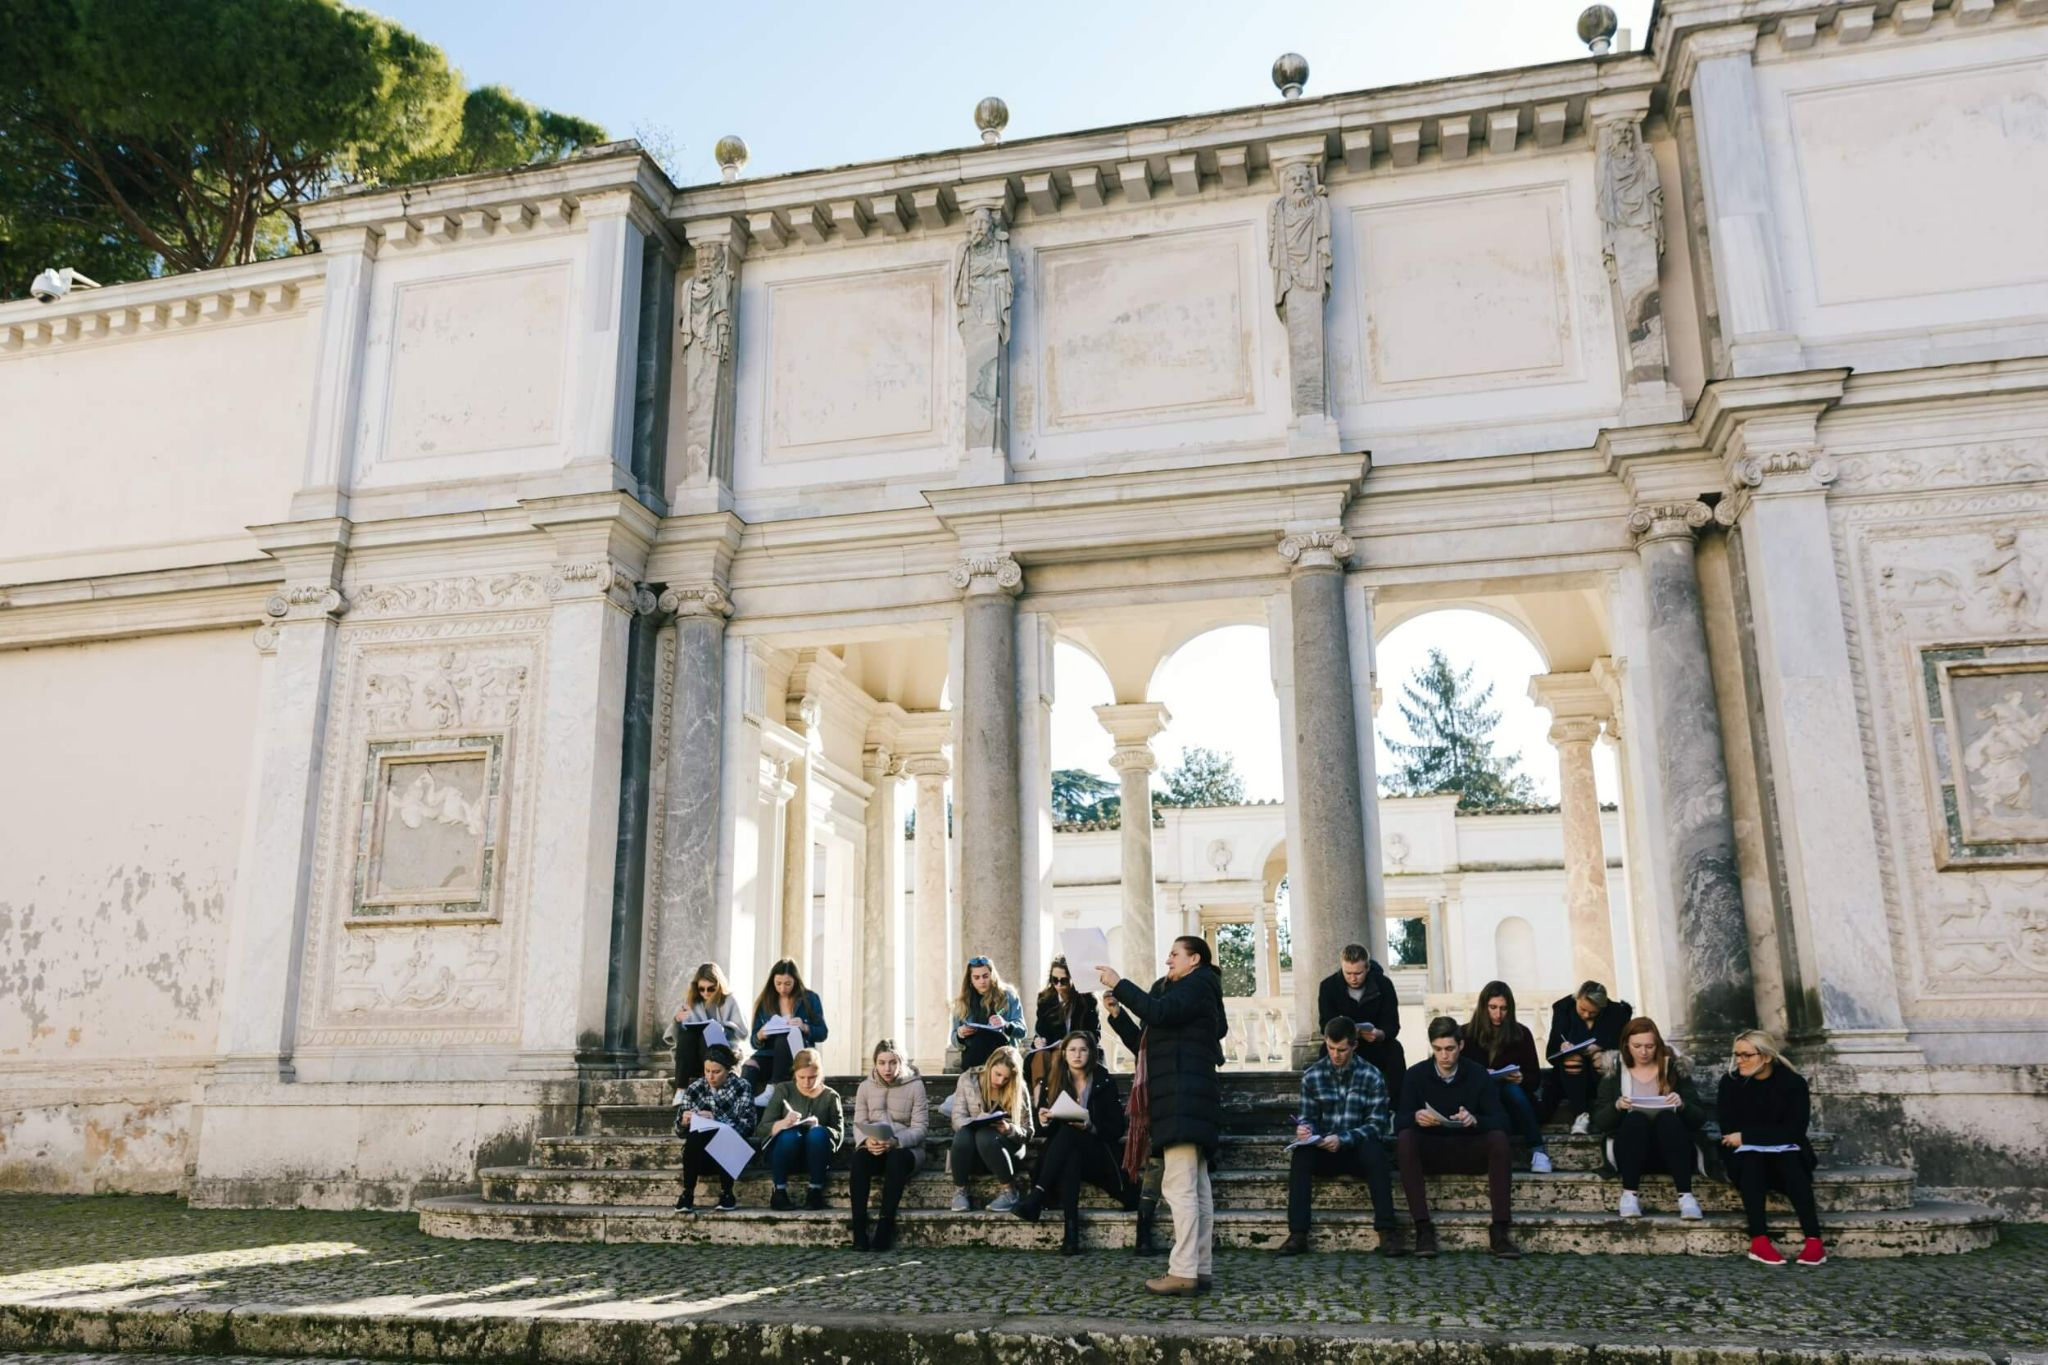 Students who study art history in Rome learning about an ancient monument on site